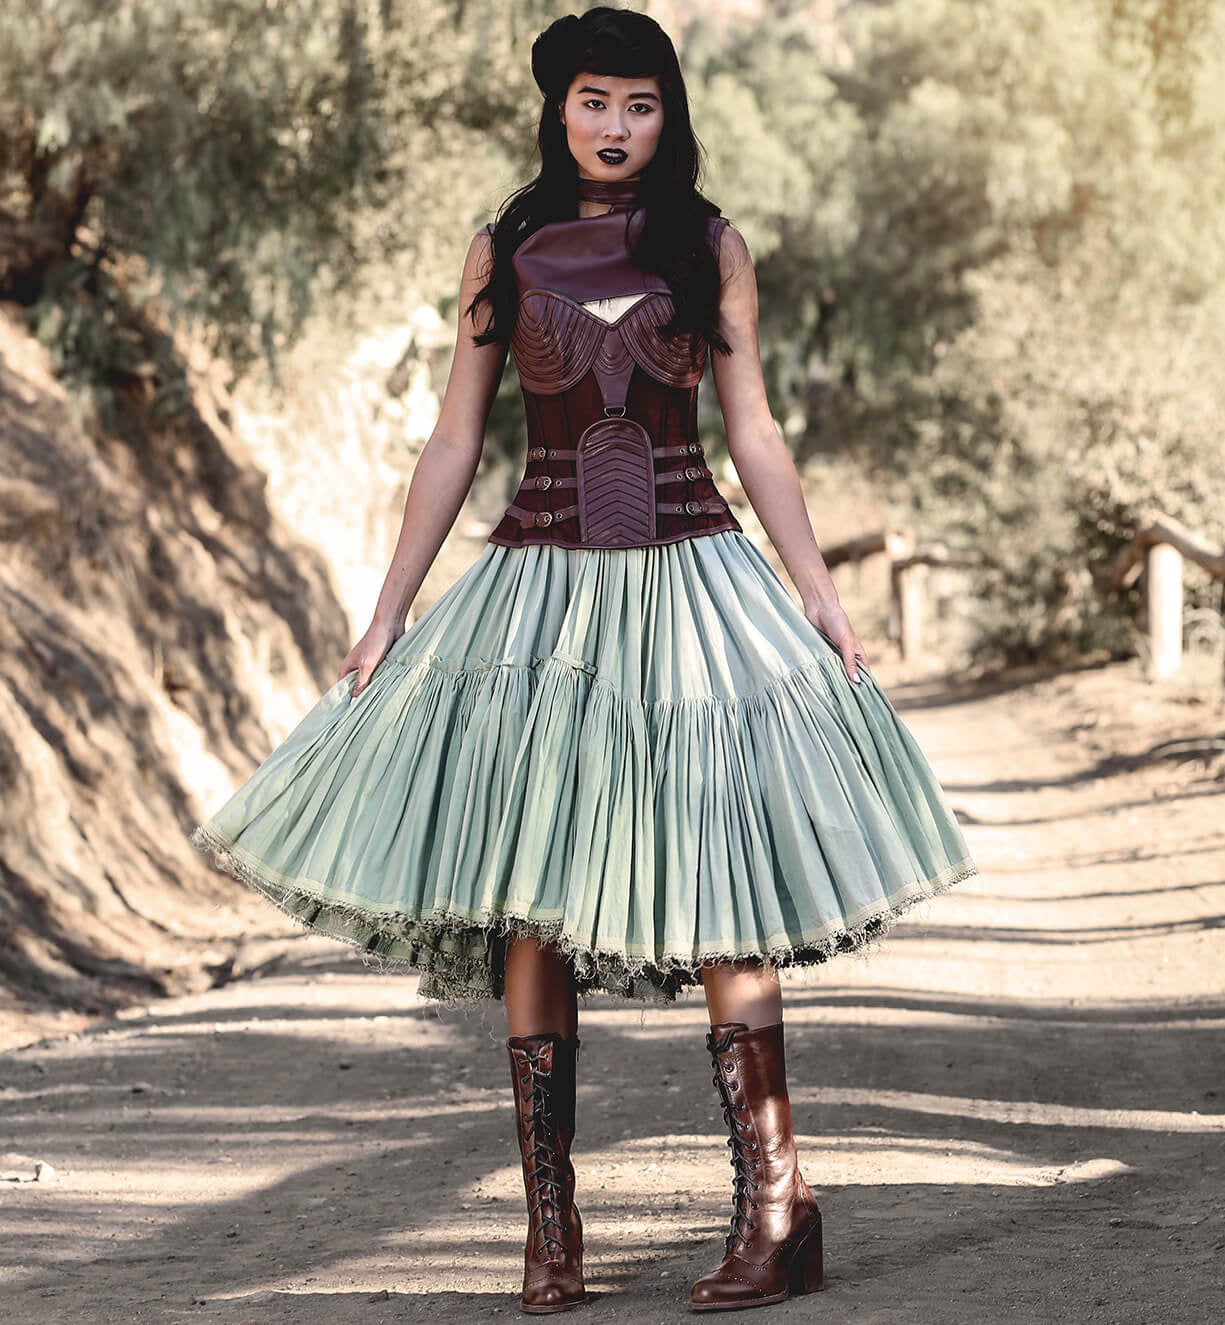 A woman wearing the "Ariana" lace skirt and "Oak Tree Farms" leather boots on a dirt road.